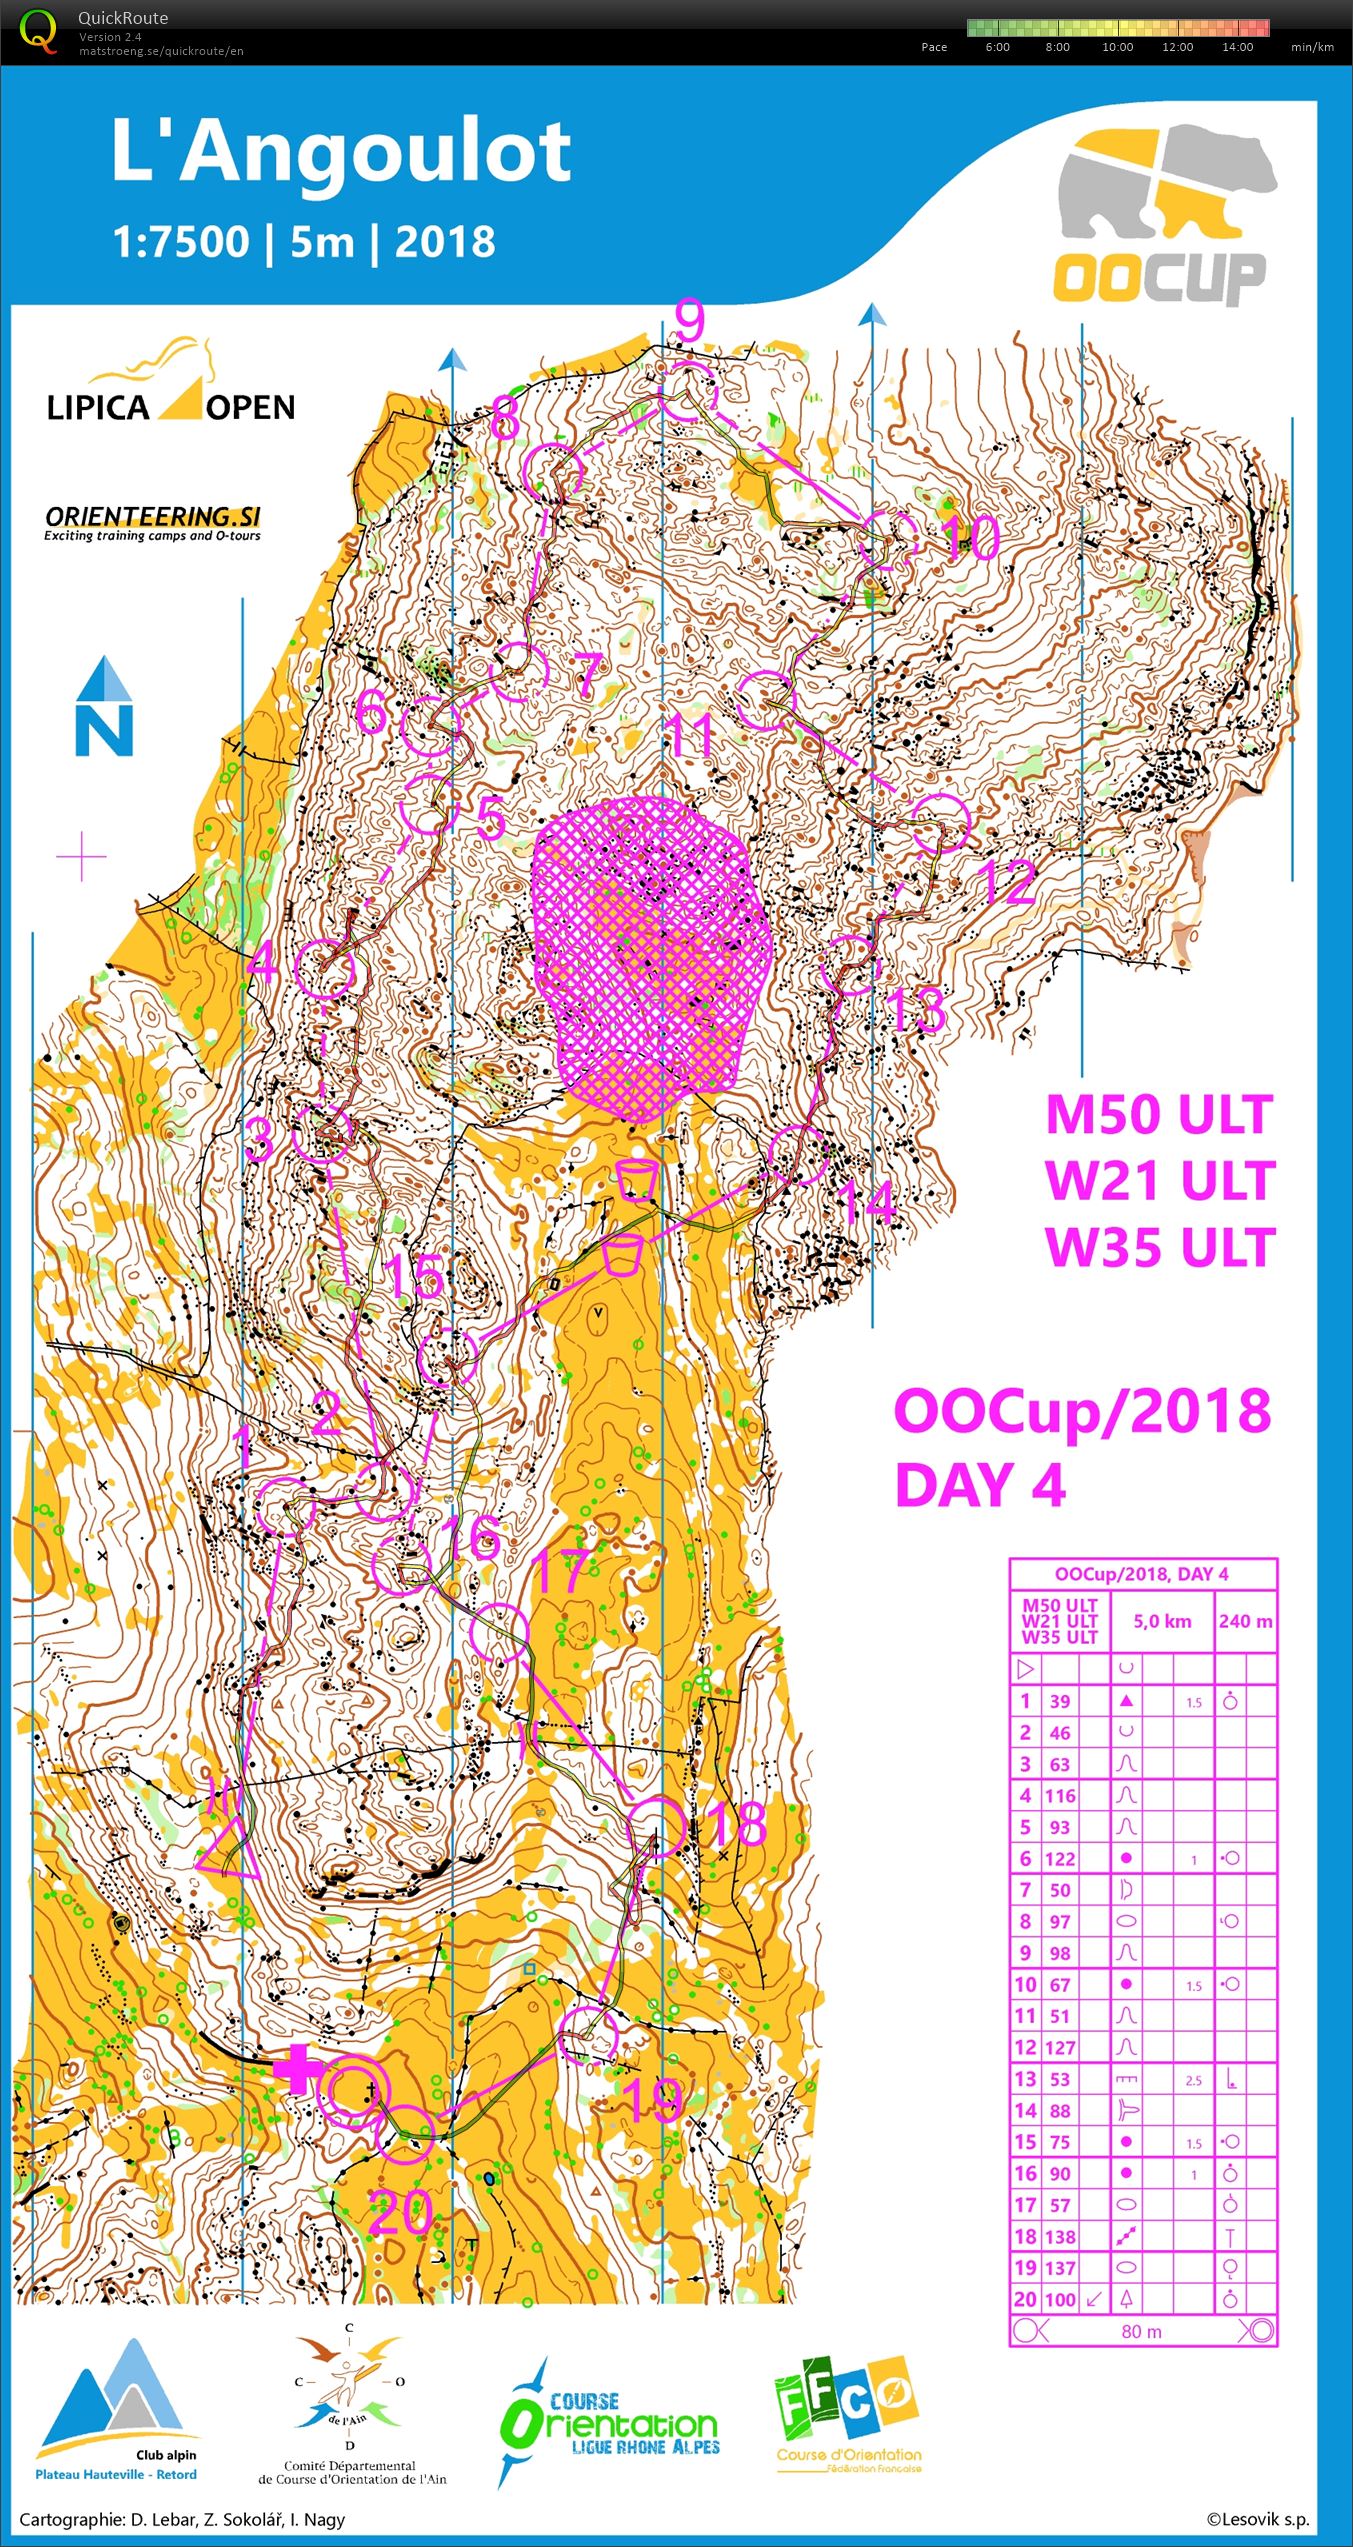 OOcup 2018 - Day 4 (28.07.2018)